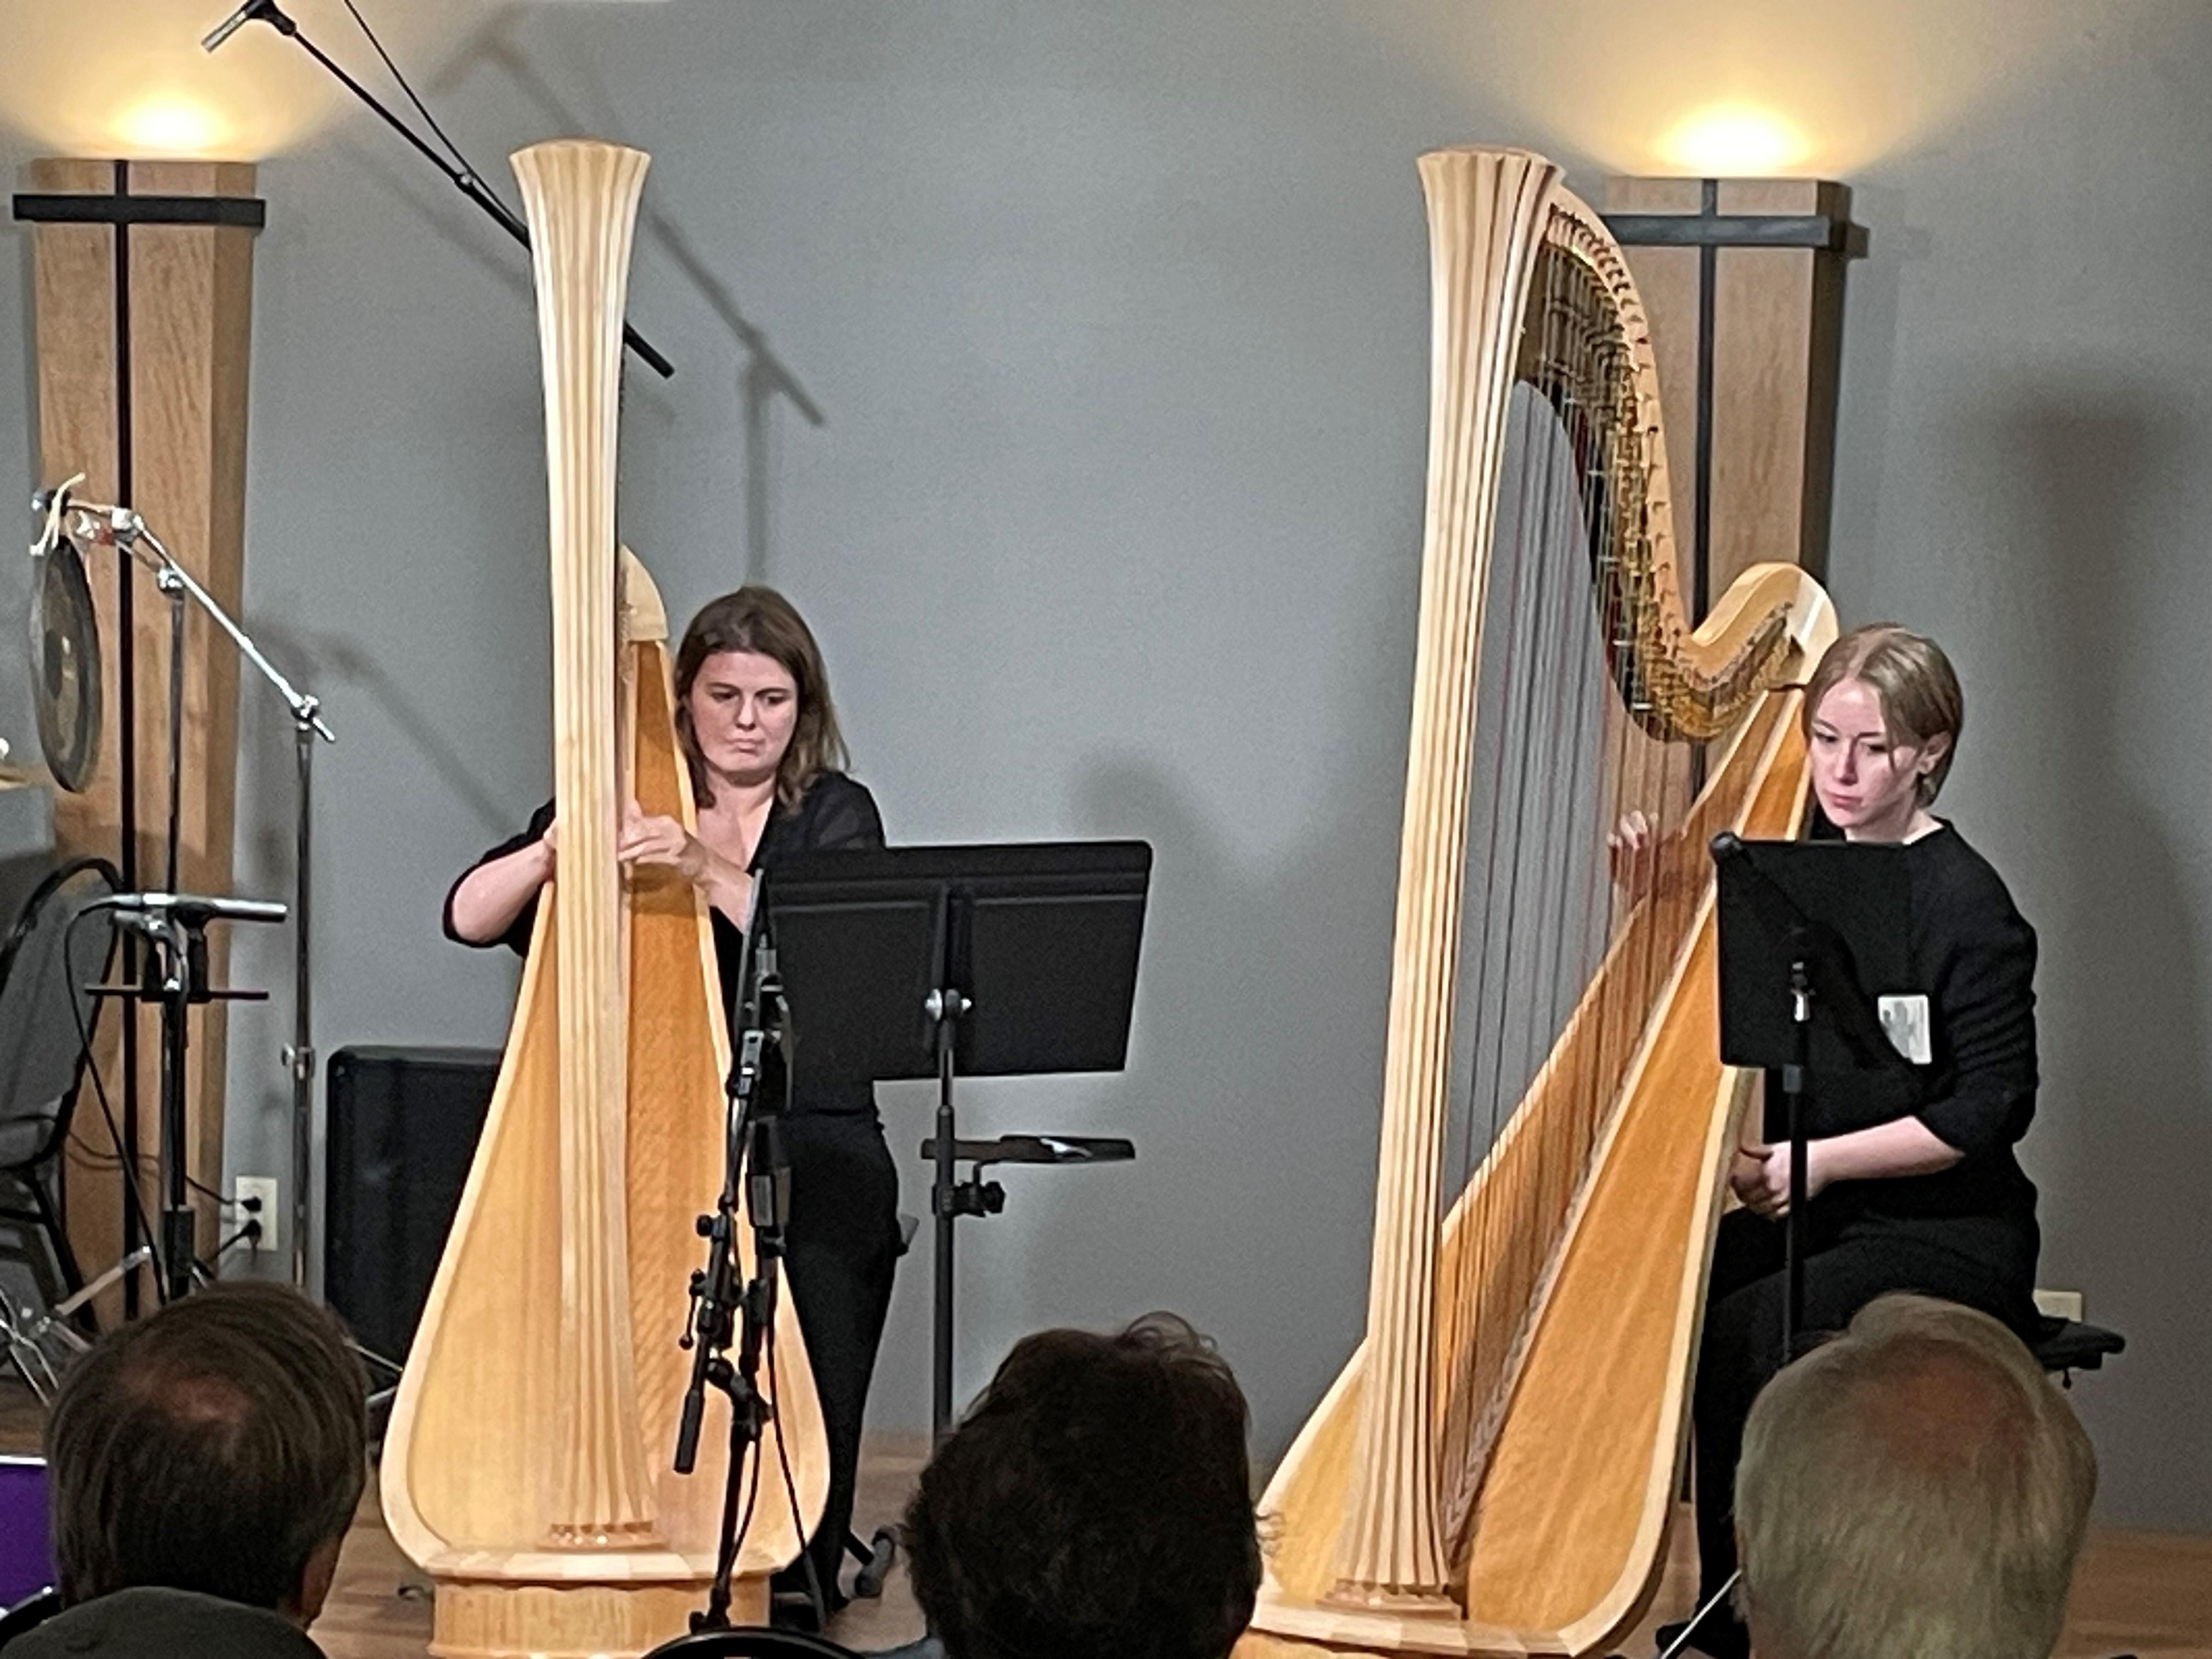 Two women performing on stage, one playing a harp